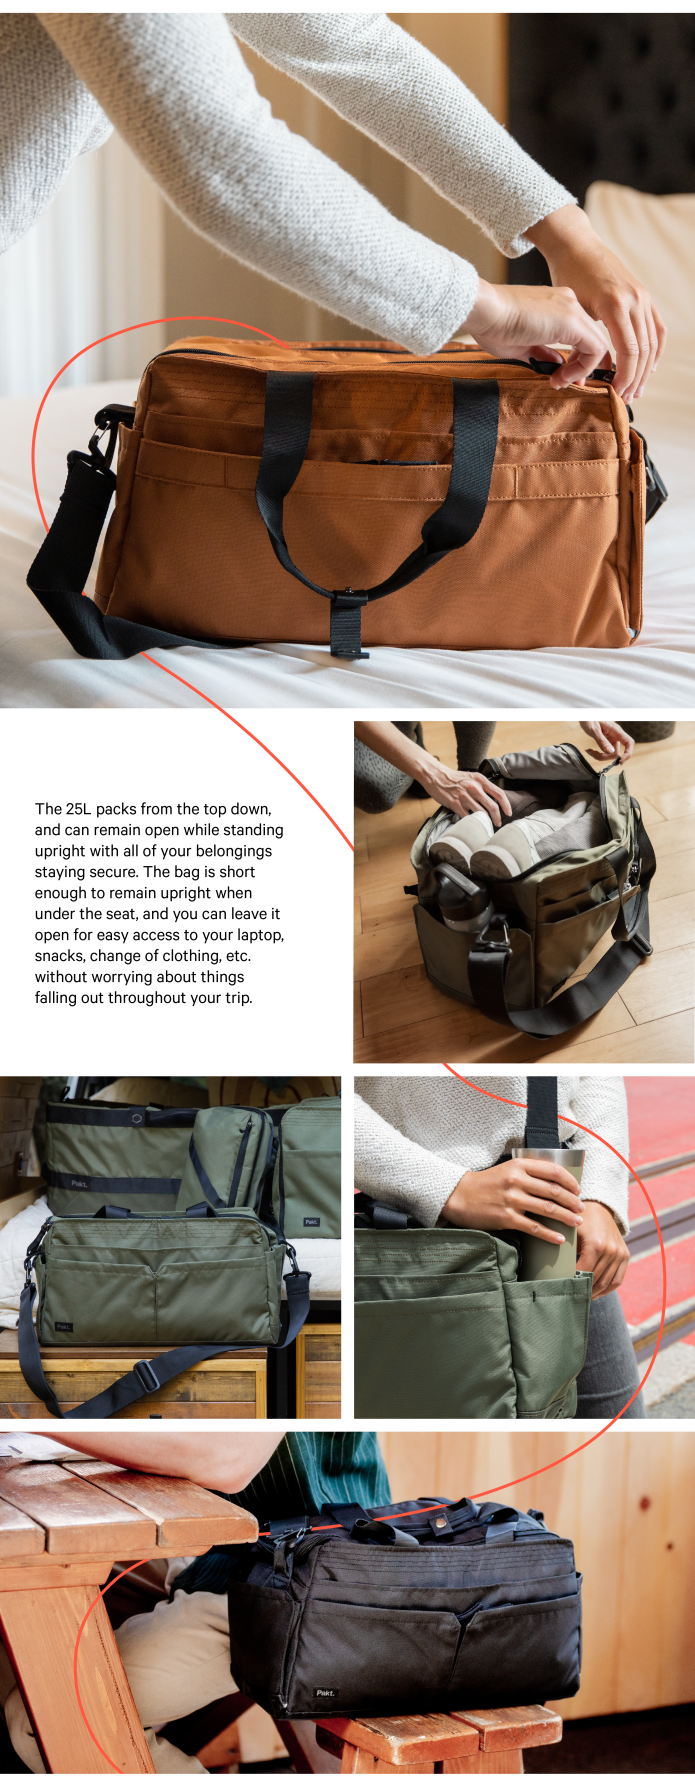 The Pakt Anywhere Travel Bag Collection | Indiegogo